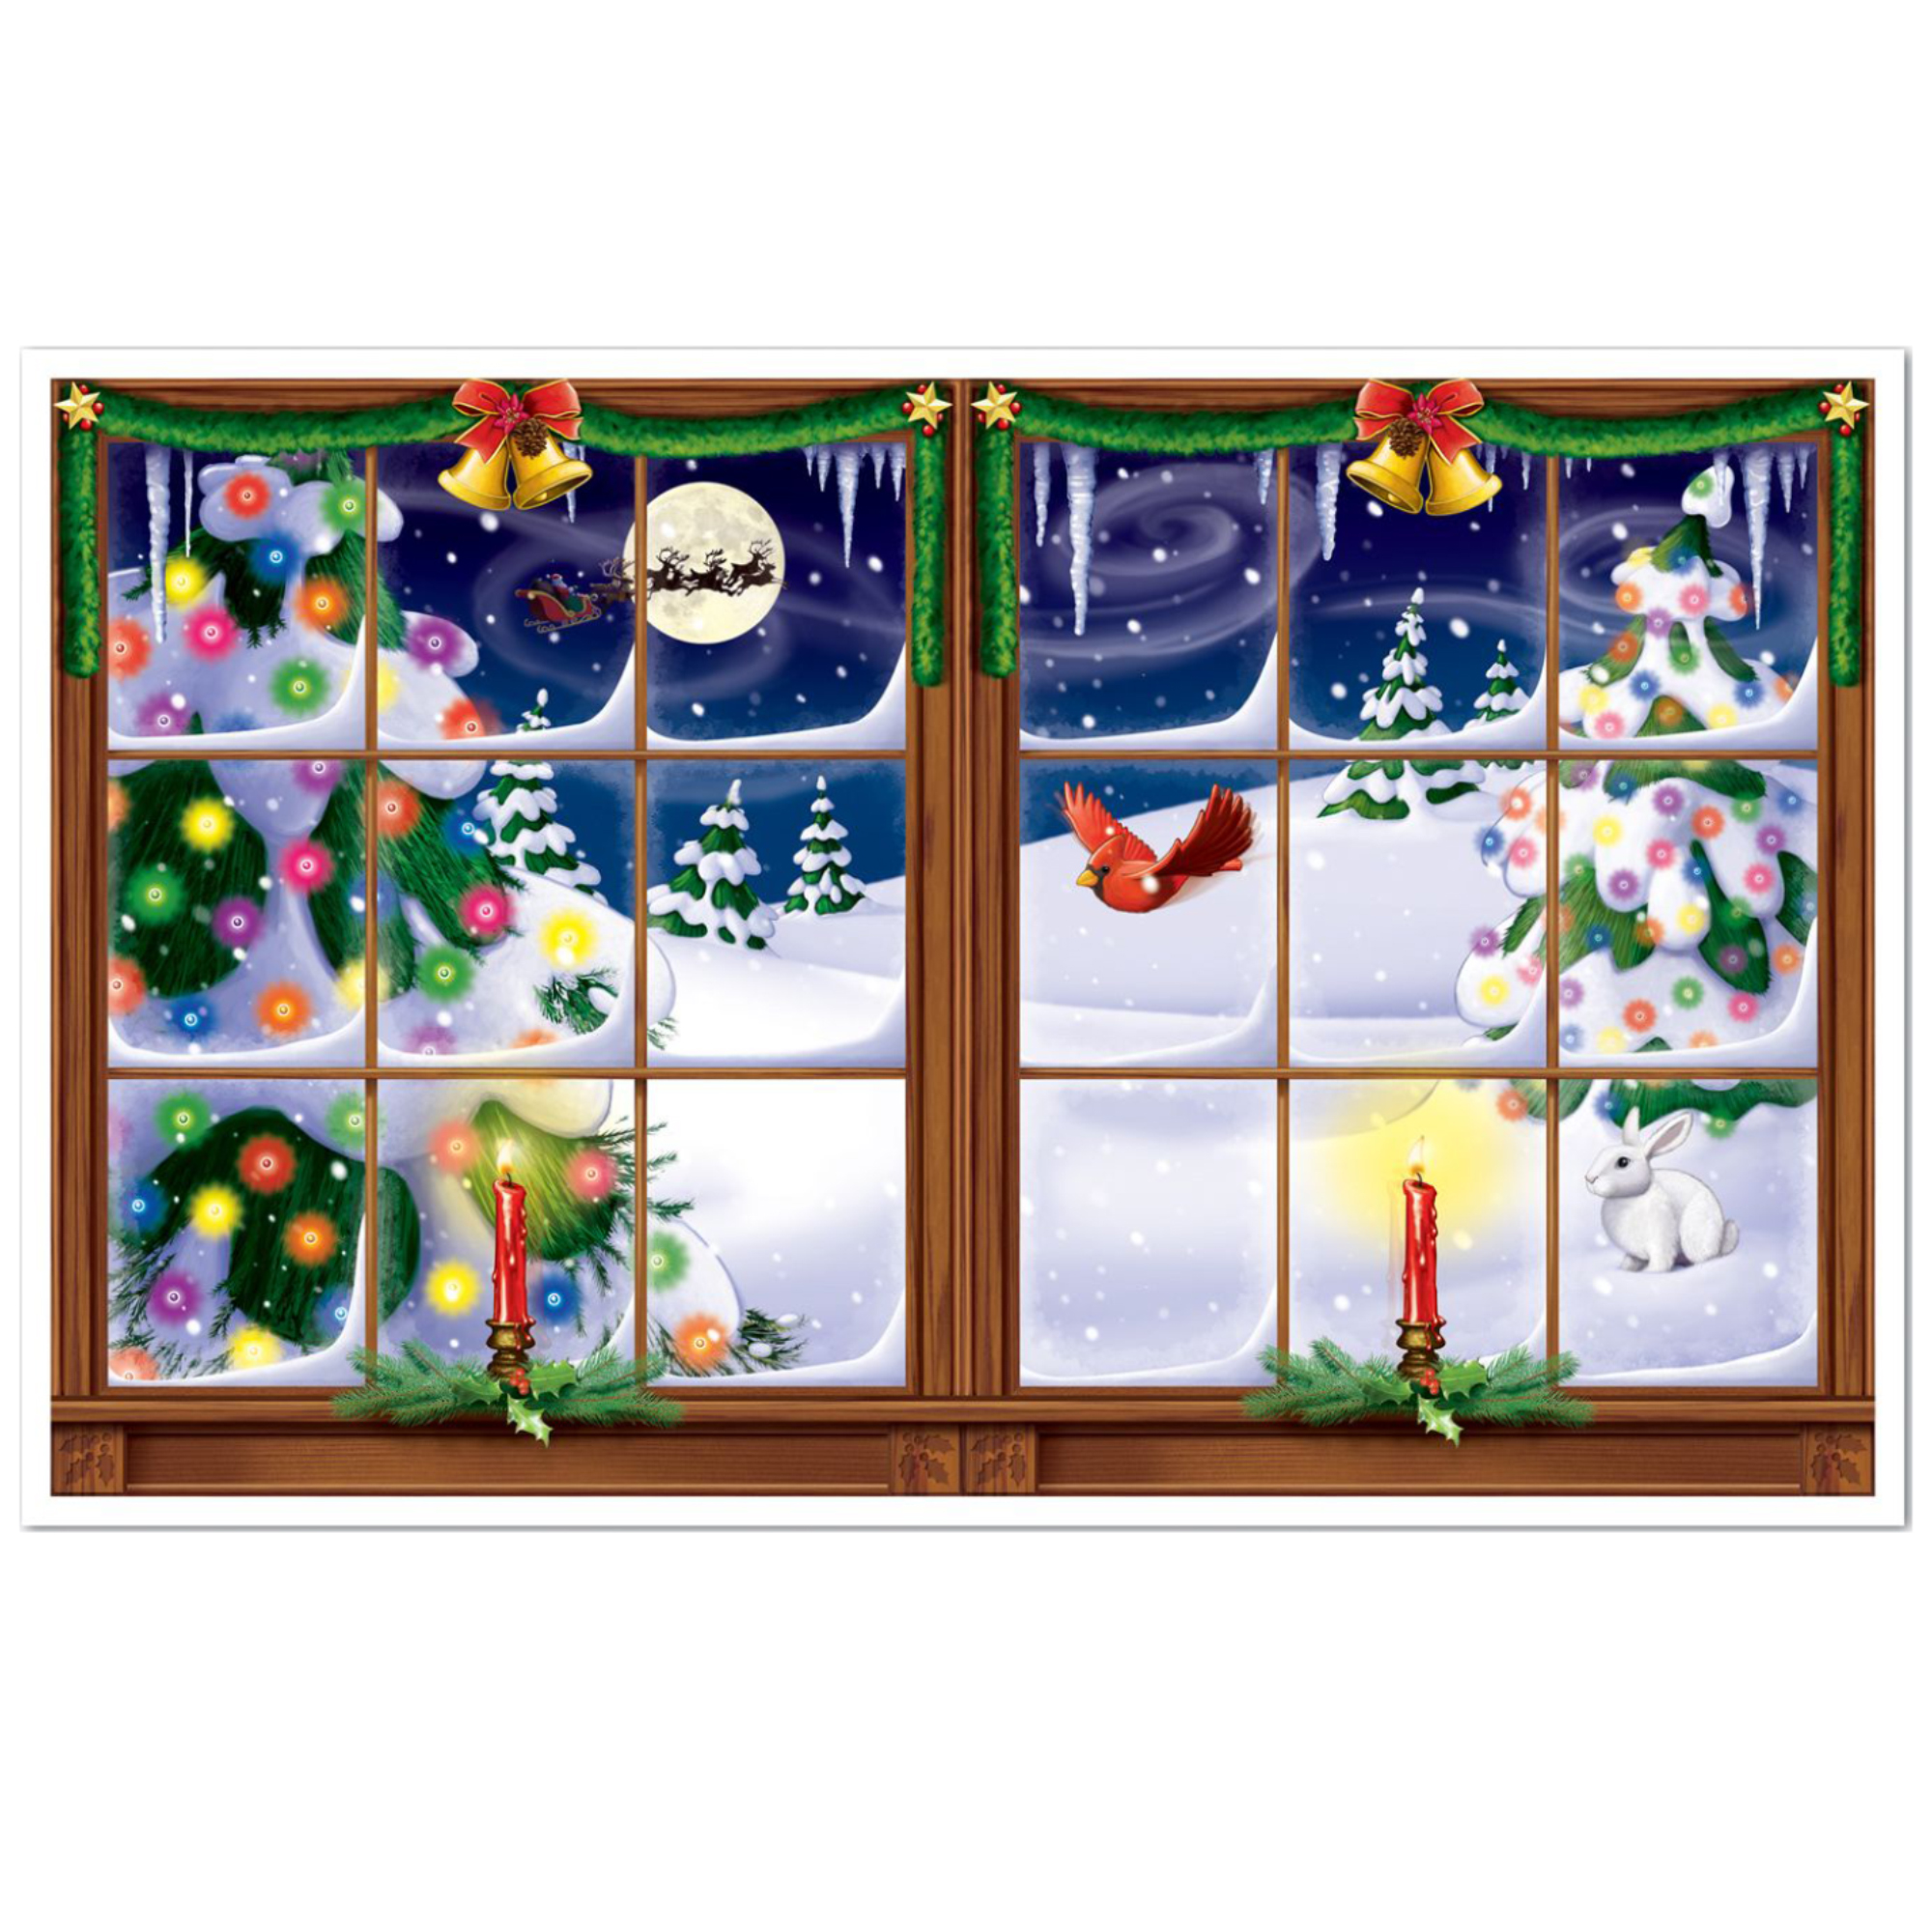 Snowy Christmas View Decoration by Windy City Novelties